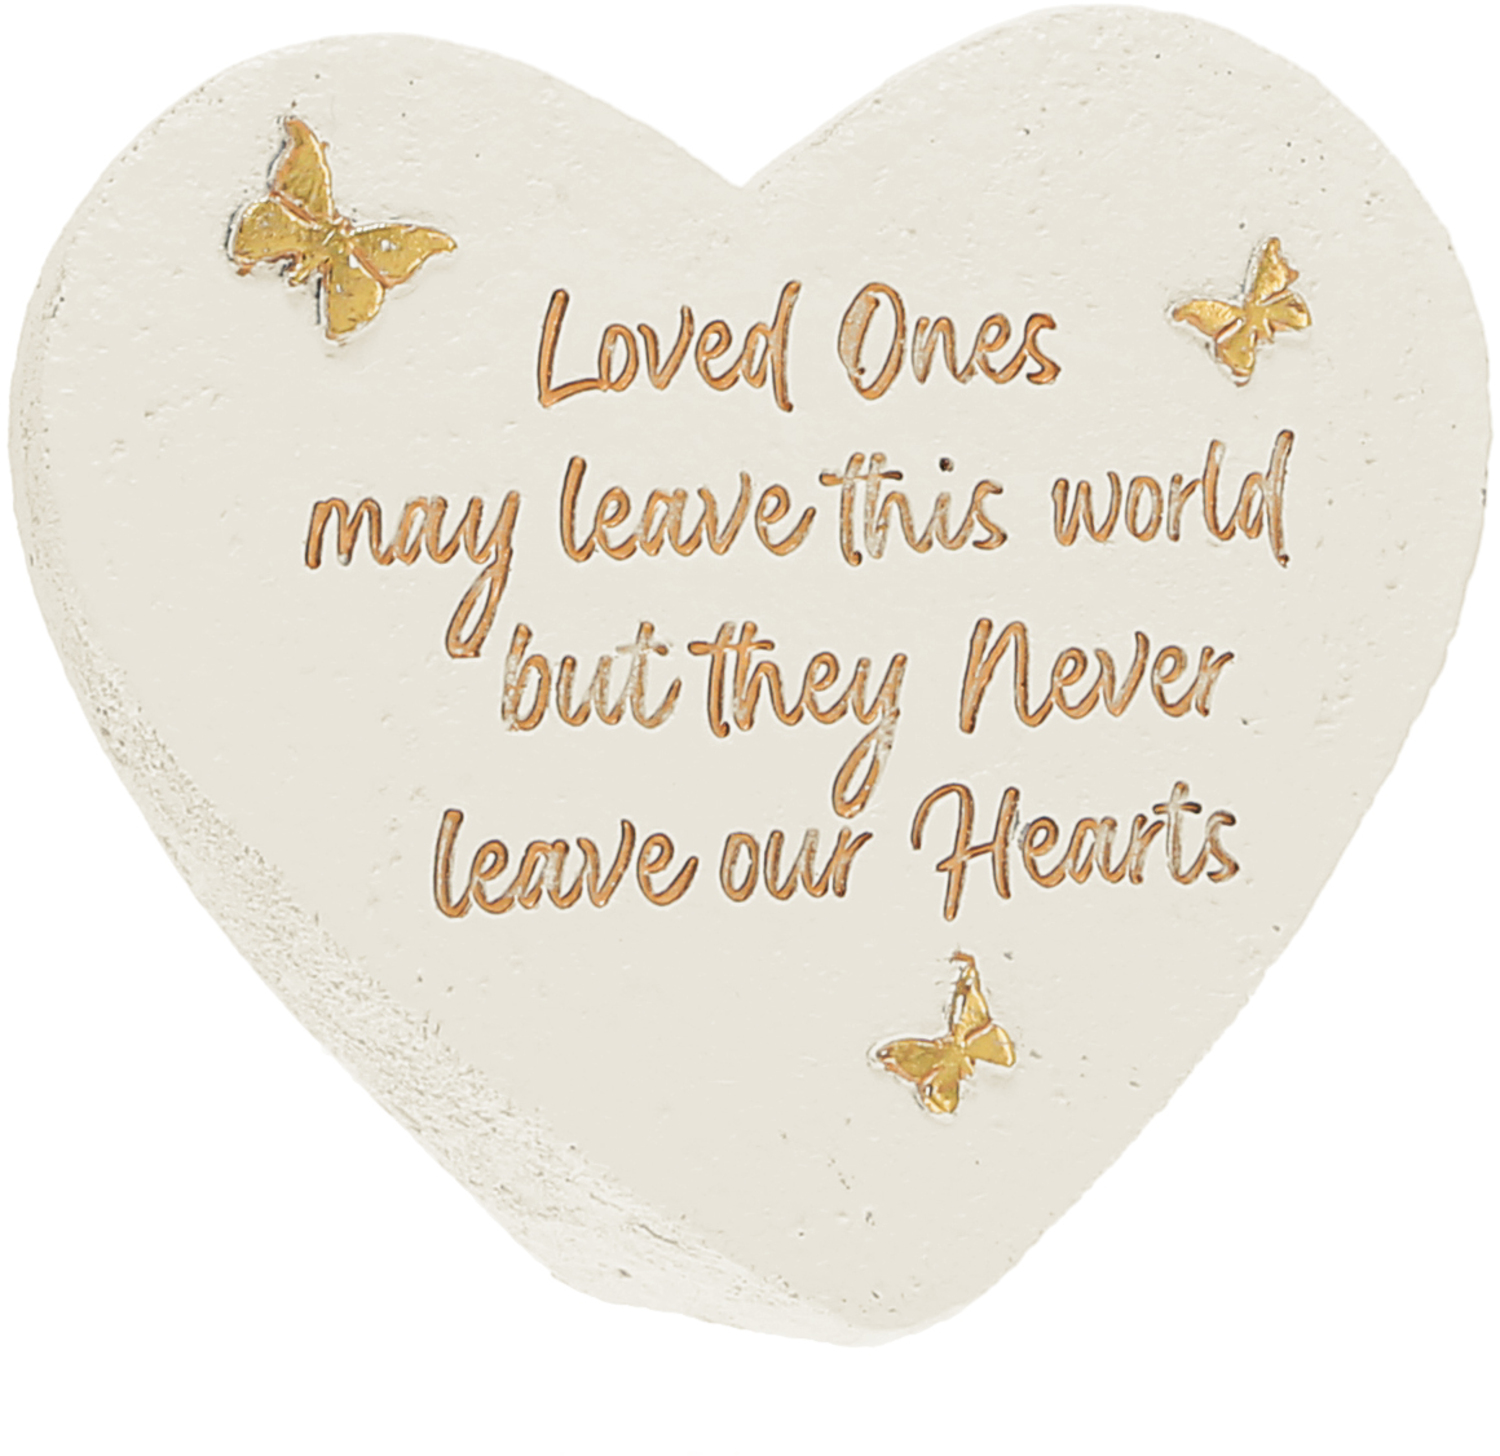 Loved Ones by Forever in our Hearts - Loved Ones - 3.5" x 3" Heart Memorial Stone